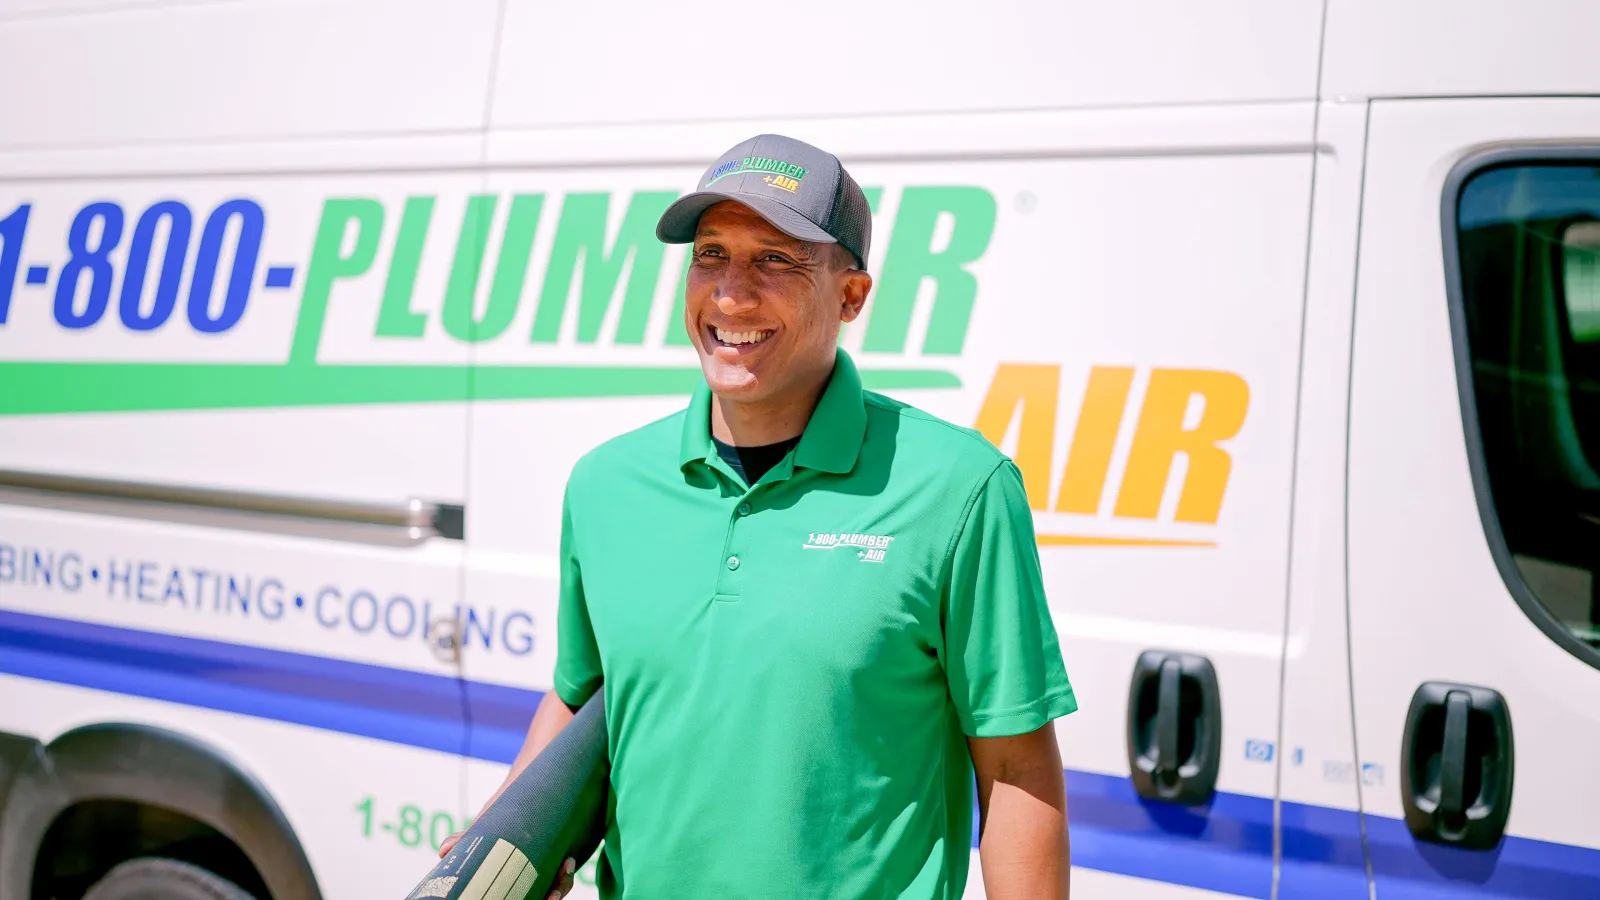 A 1-800-Plumber +Air of Clearwater technician